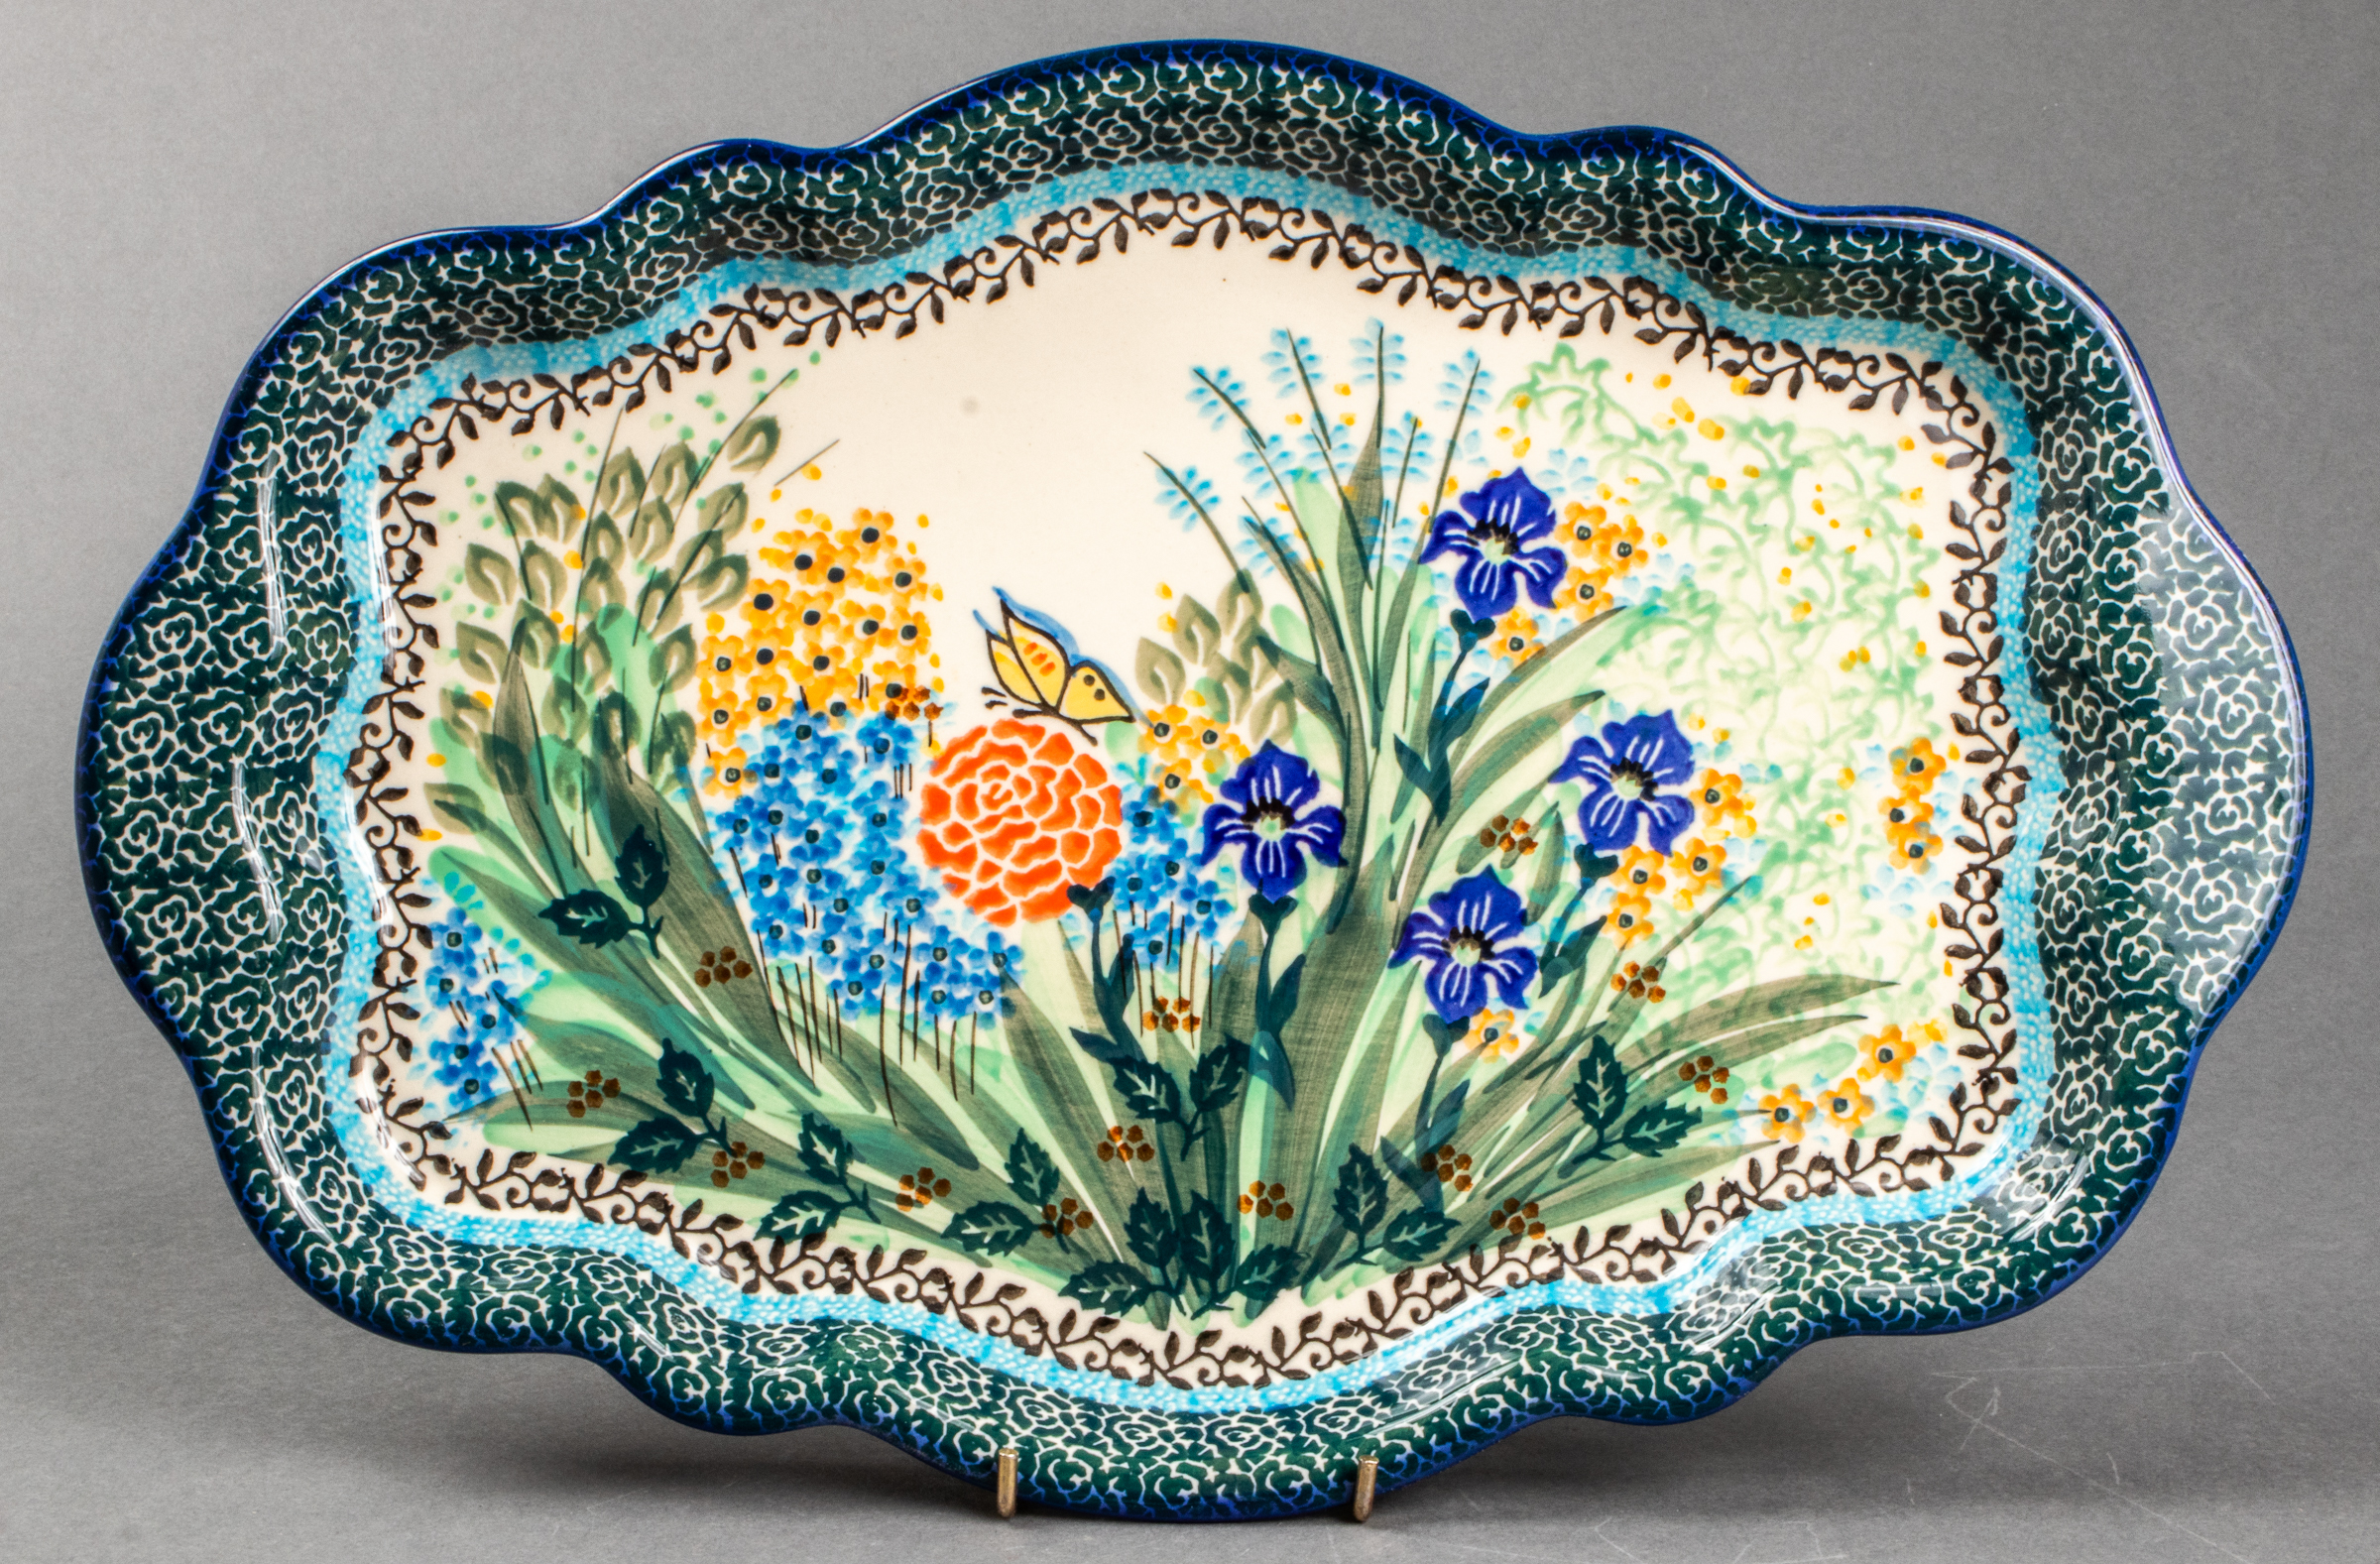 POLISH HAND PAINTED CERAMIC SERVING 3c3a66